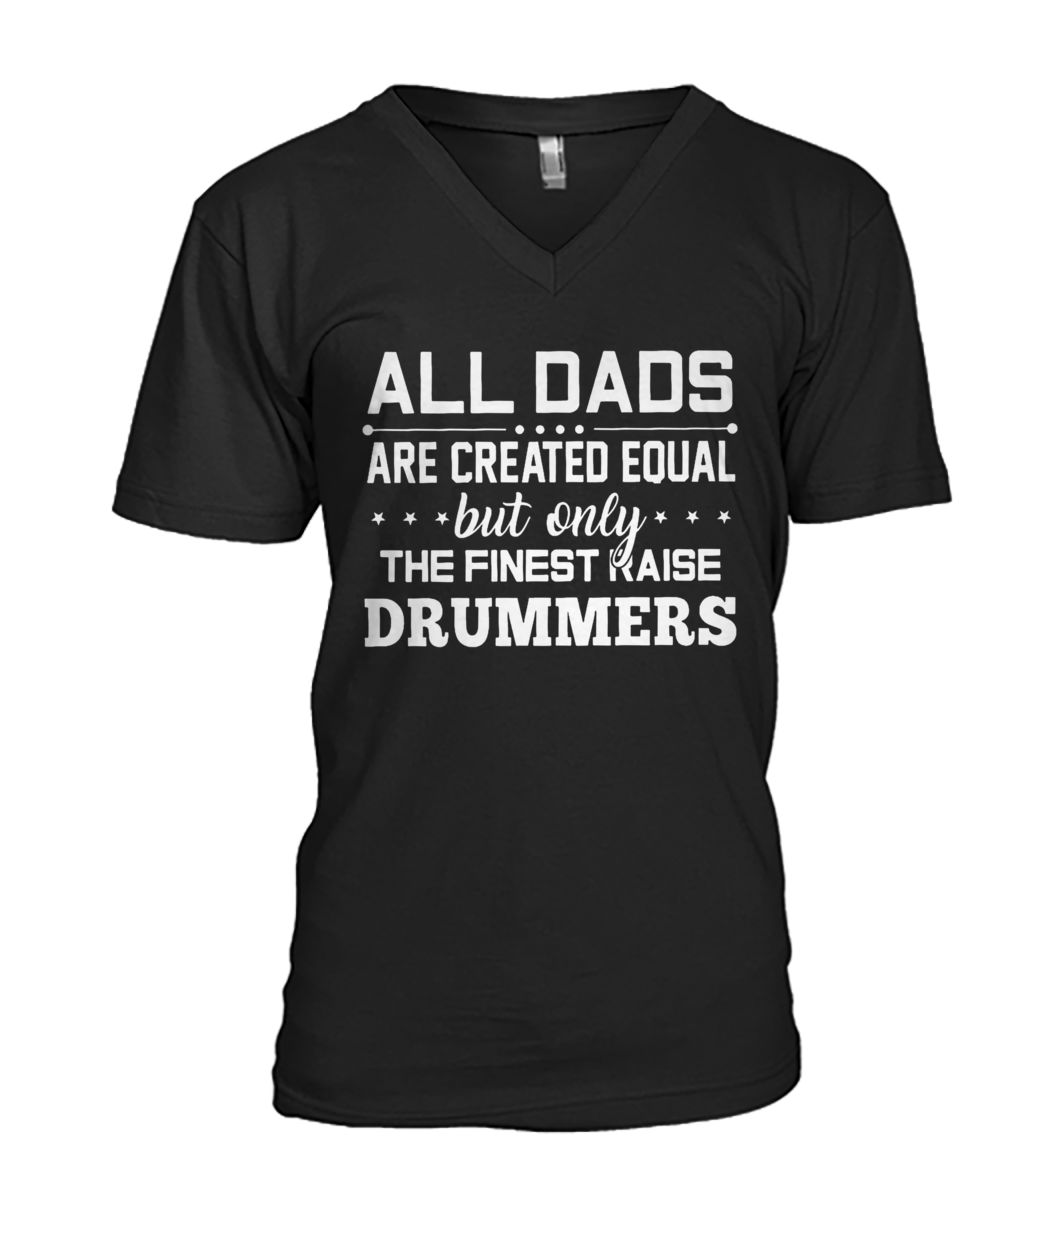 All dads are created equal but only the finest raise drummers mens v-neck